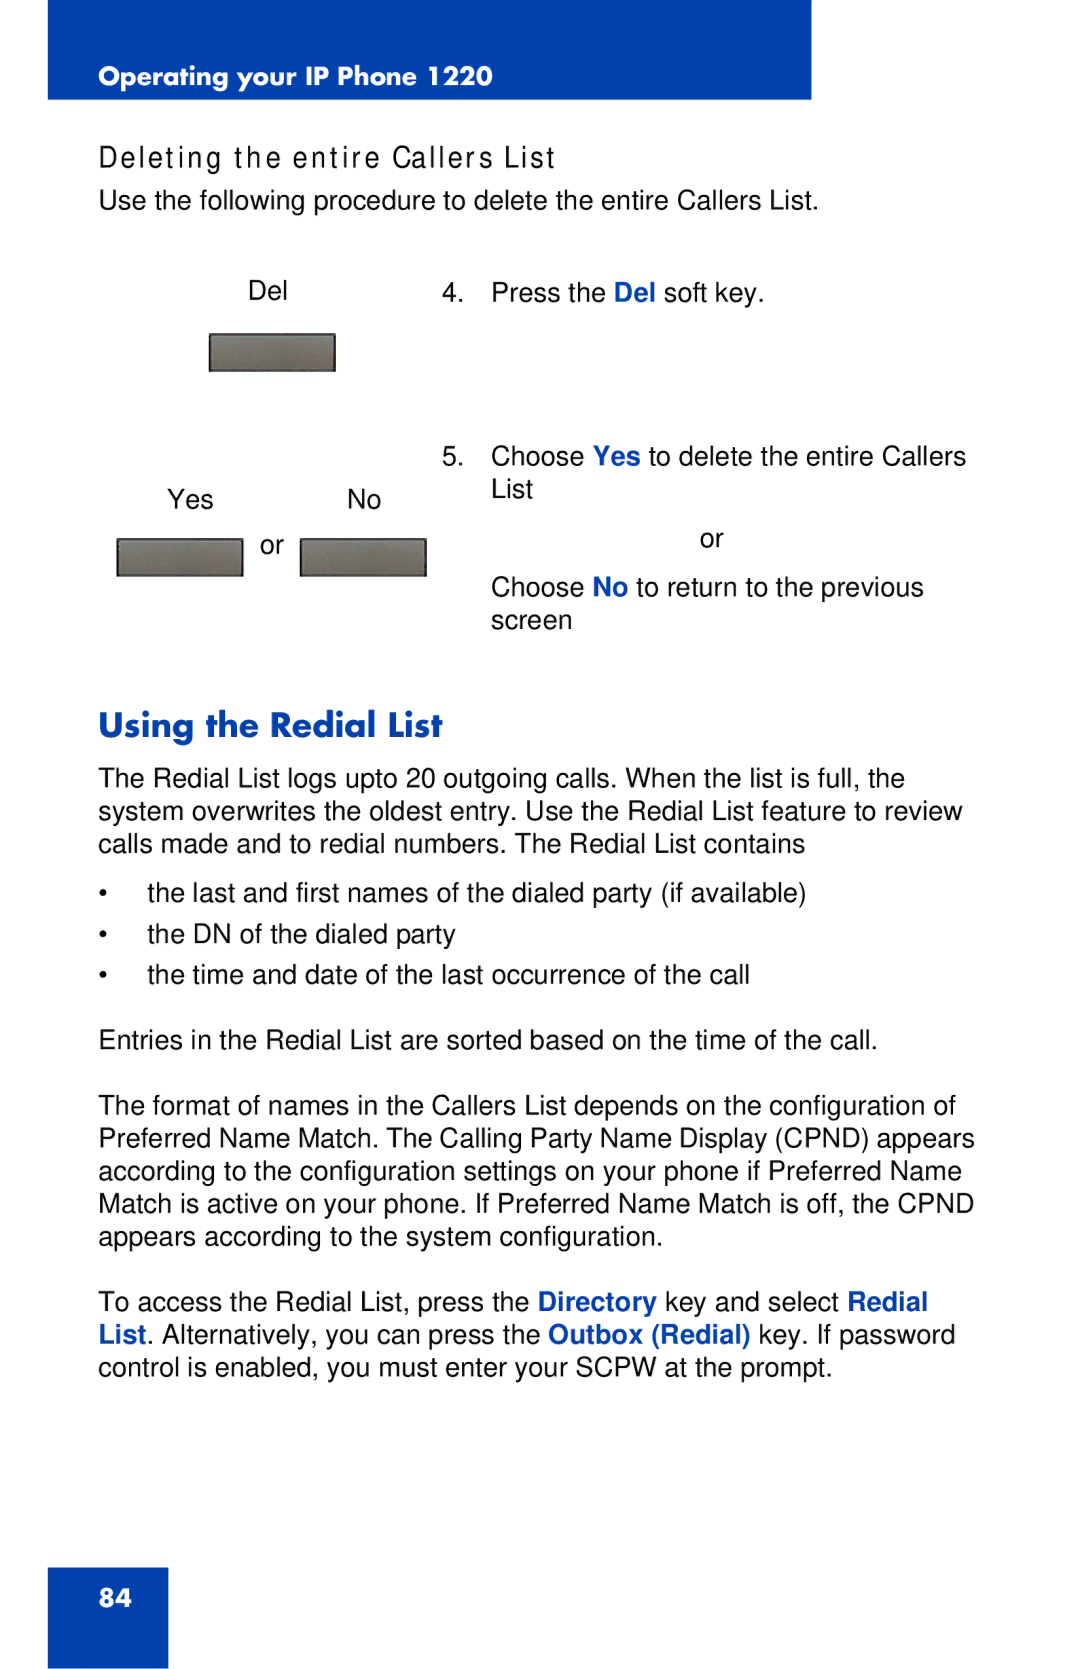 Nortel Networks IP Phone 1220 manual Using the Redial List, Deleting the entire Callers List 